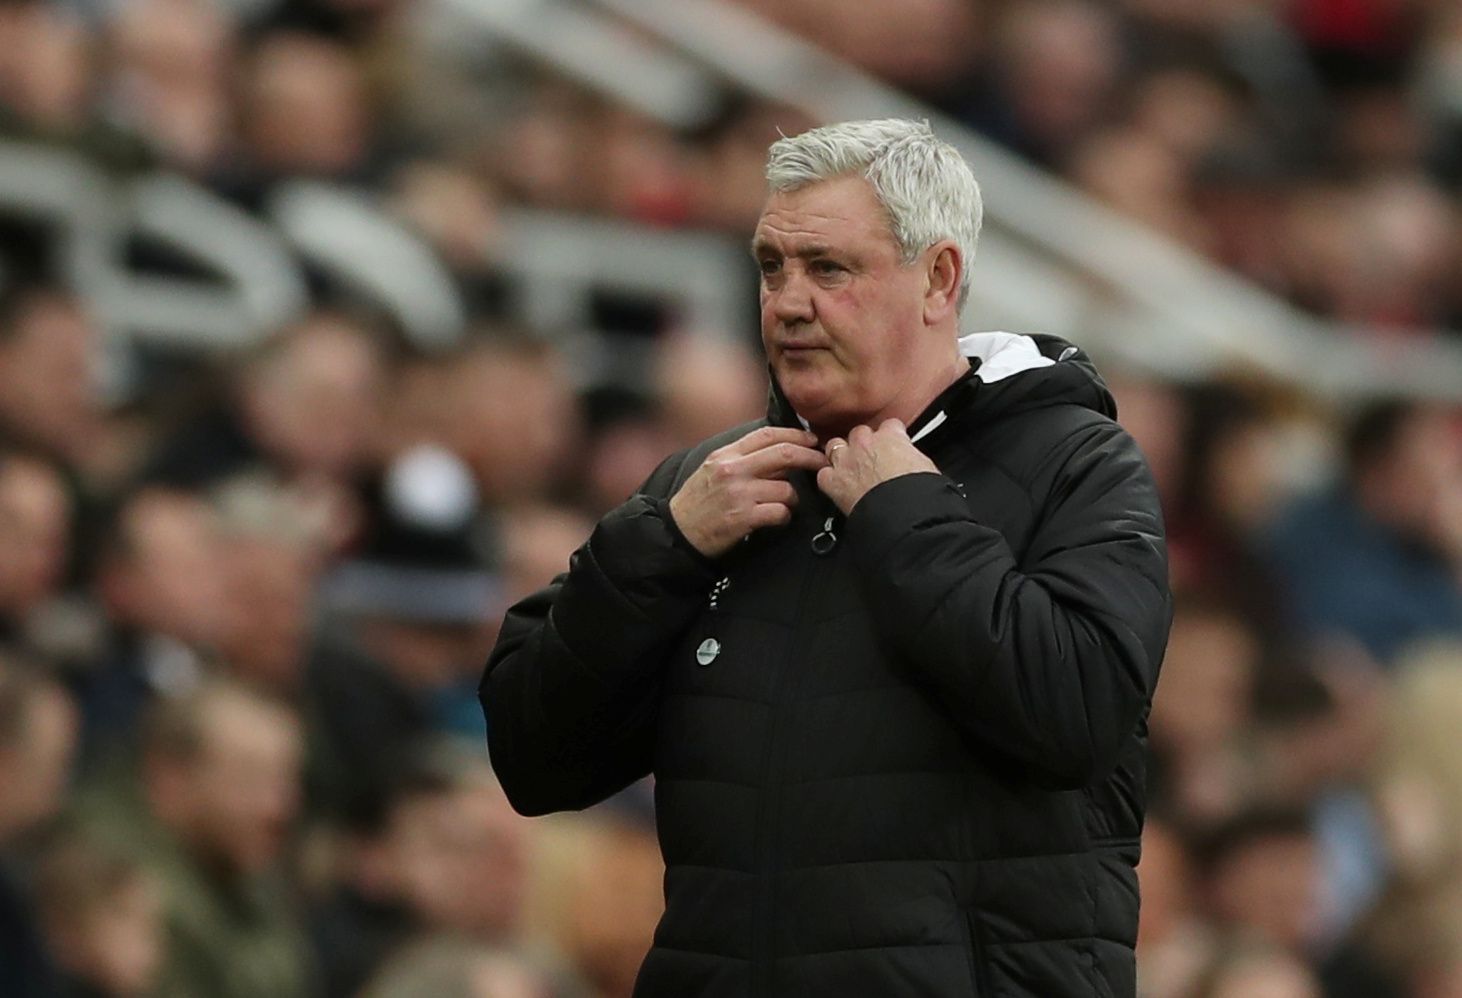 Soccer Football - Premier League - Newcastle United v Norwich City - St James' Park, Newcastle, Britain - February 1, 2020  Newcastle United manager Steve Bruce   Action Images via Reuters/Lee Smith  EDITORIAL USE ONLY. No use with unauthorized audio, video, data, fixture lists, club/league logos or 